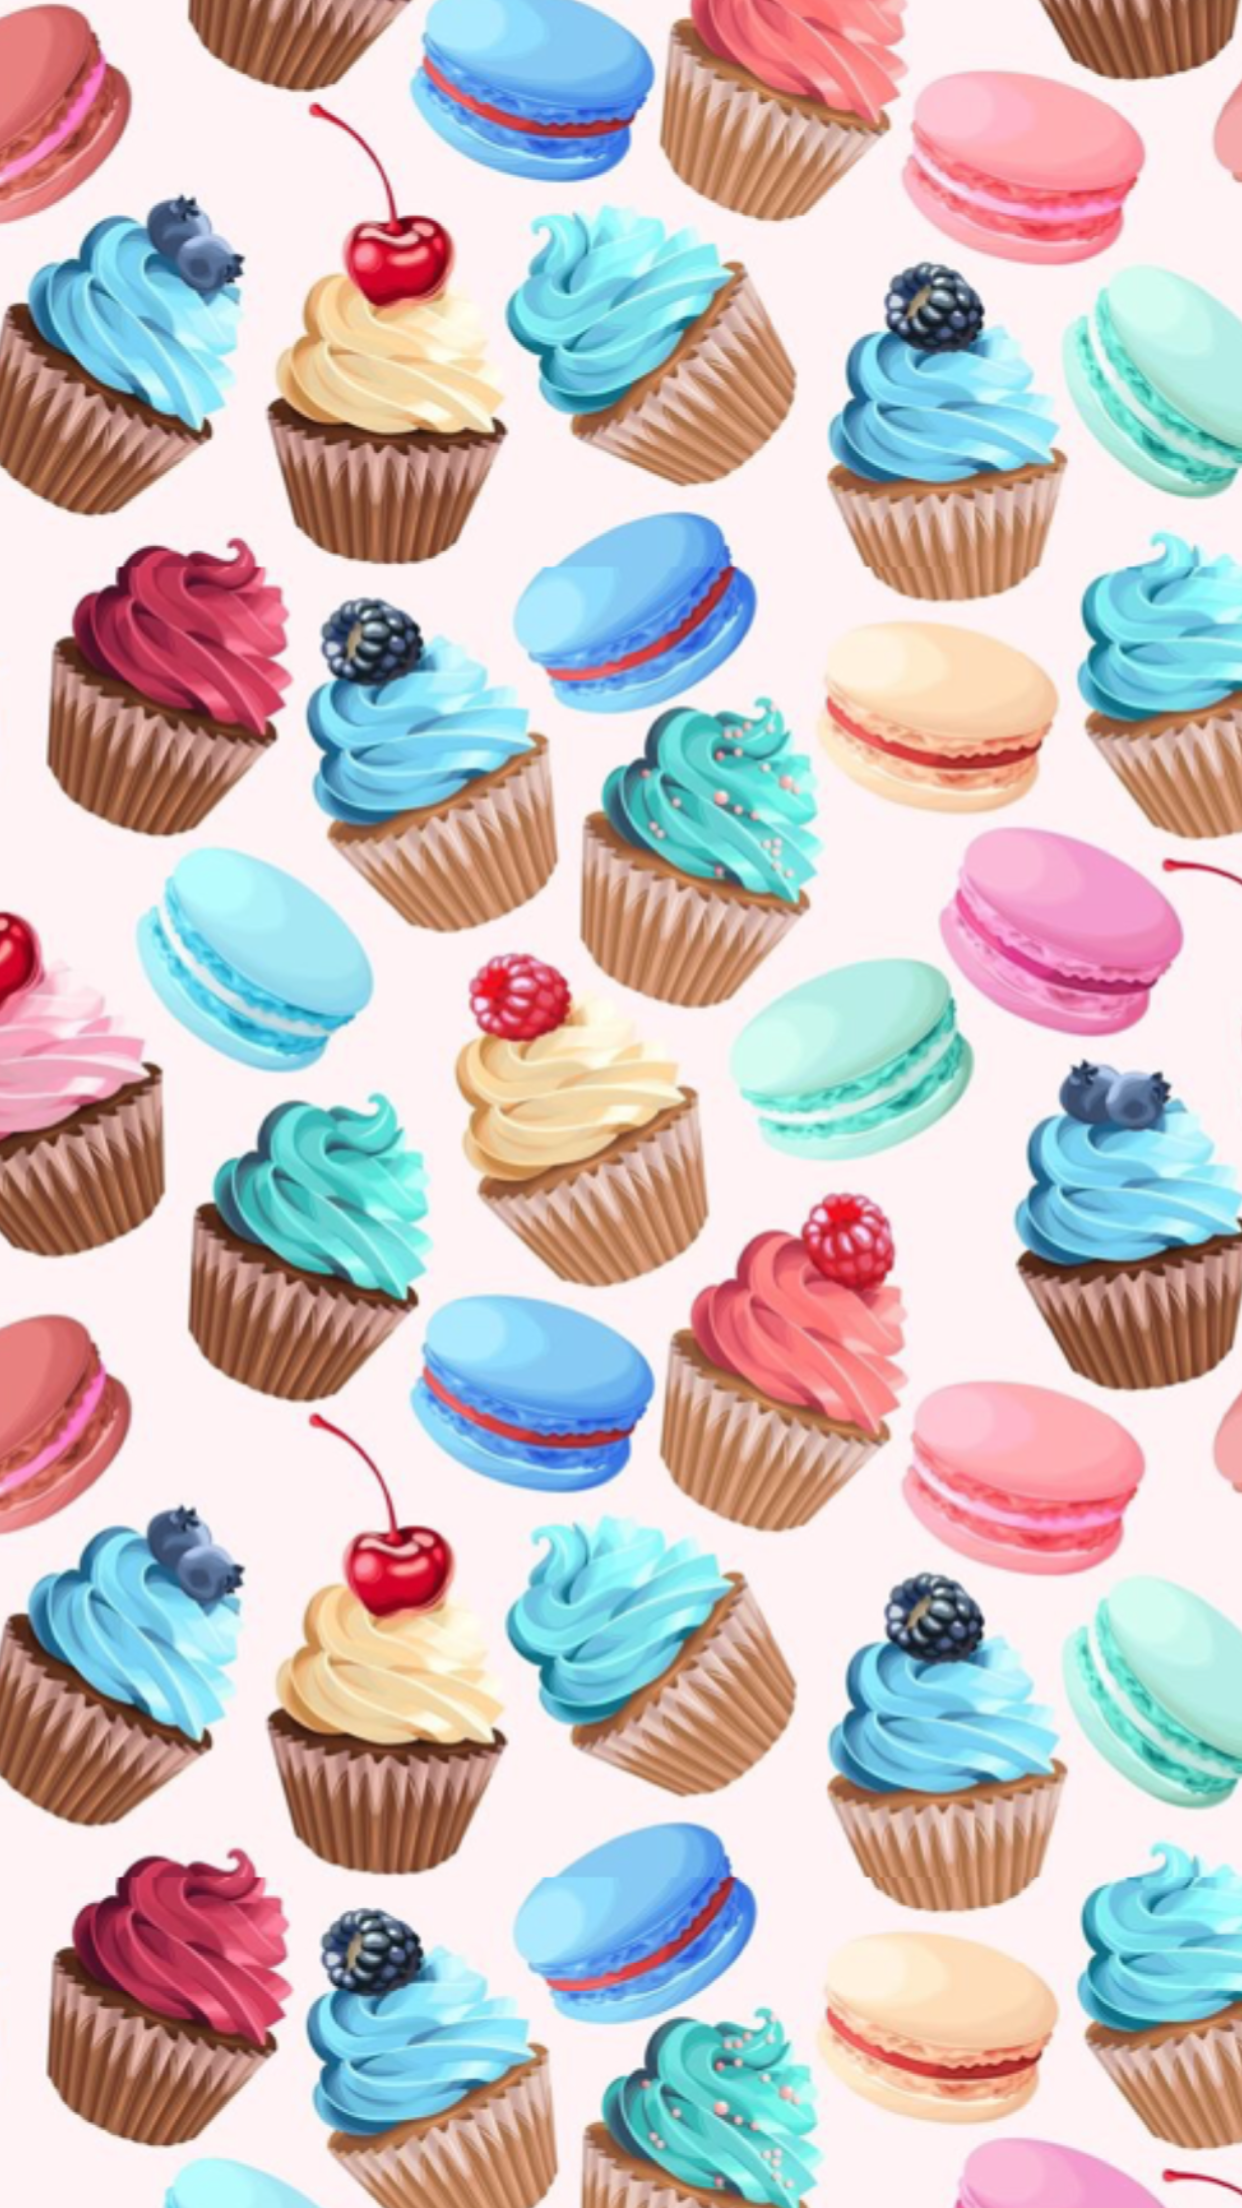 Cupcakes Background - HD Wallpaper 